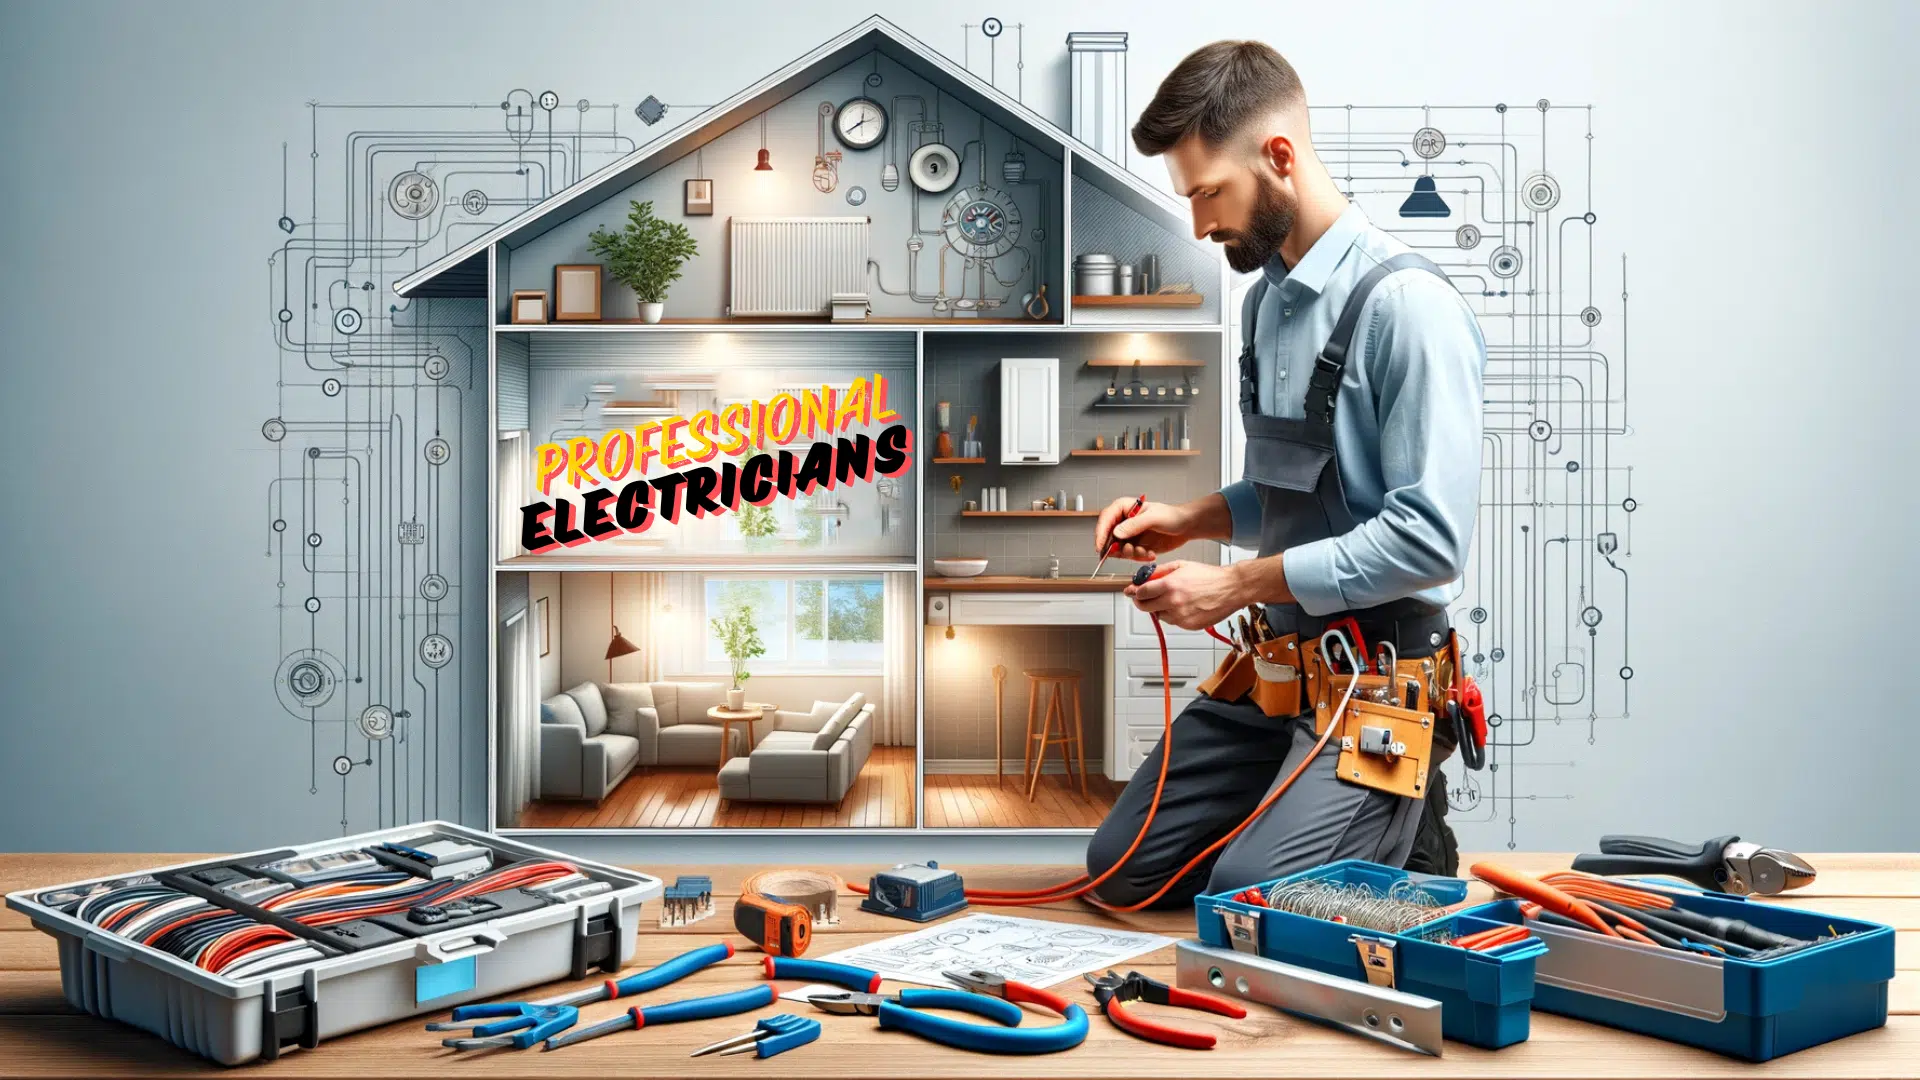 Professional Electricians for Your Home